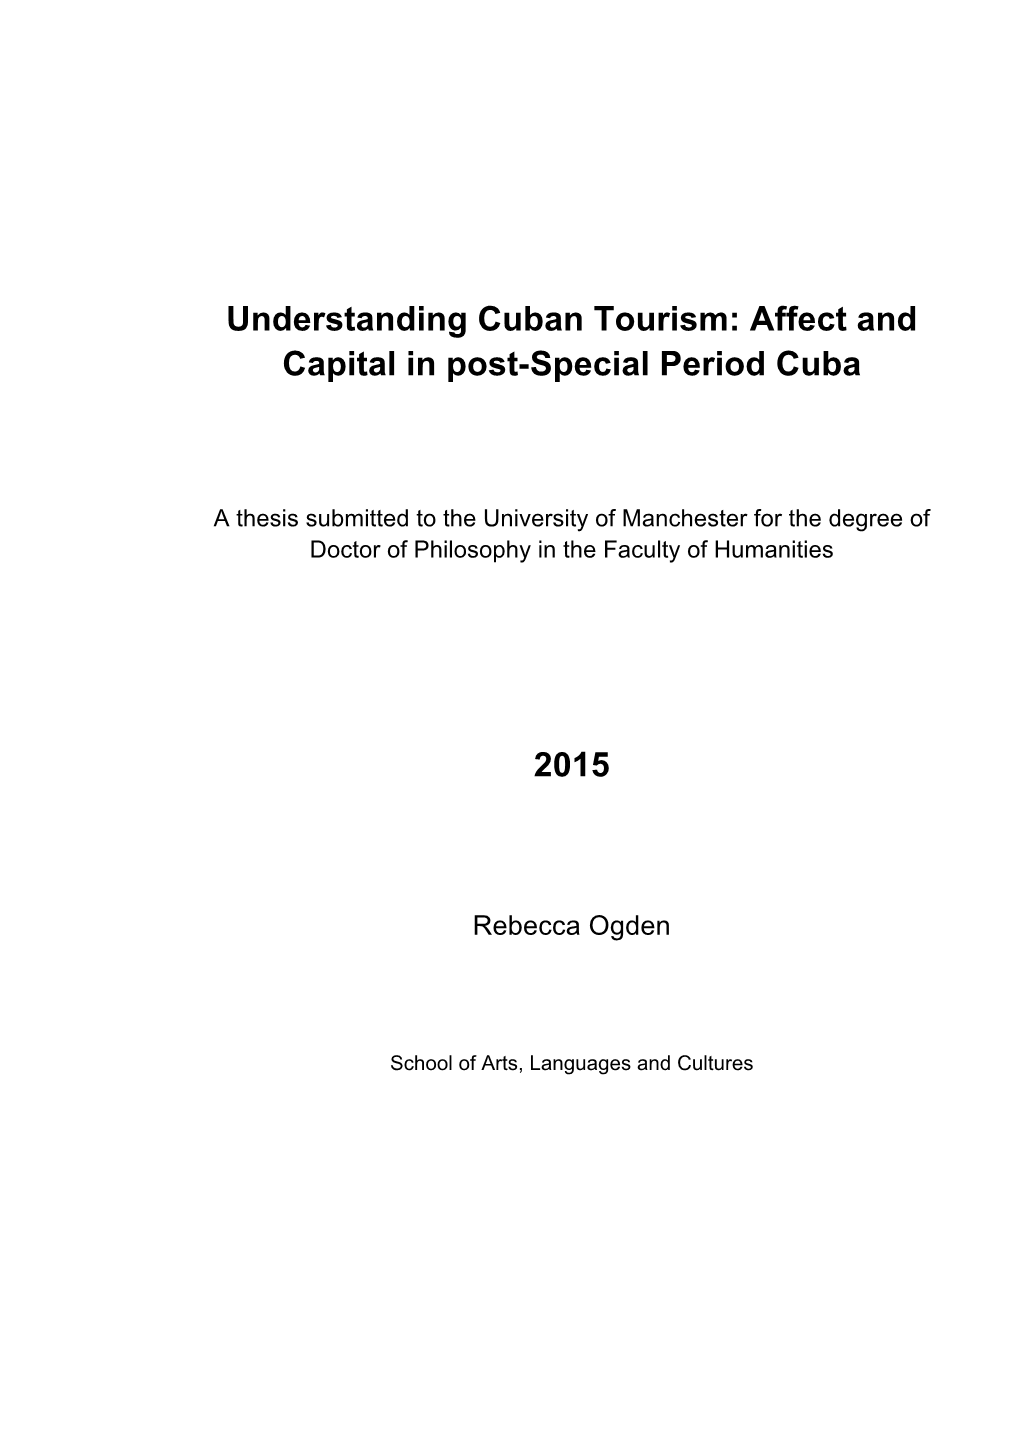 Understanding Cuban Tourism: Affect and Capital in Post-Special Period Cuba